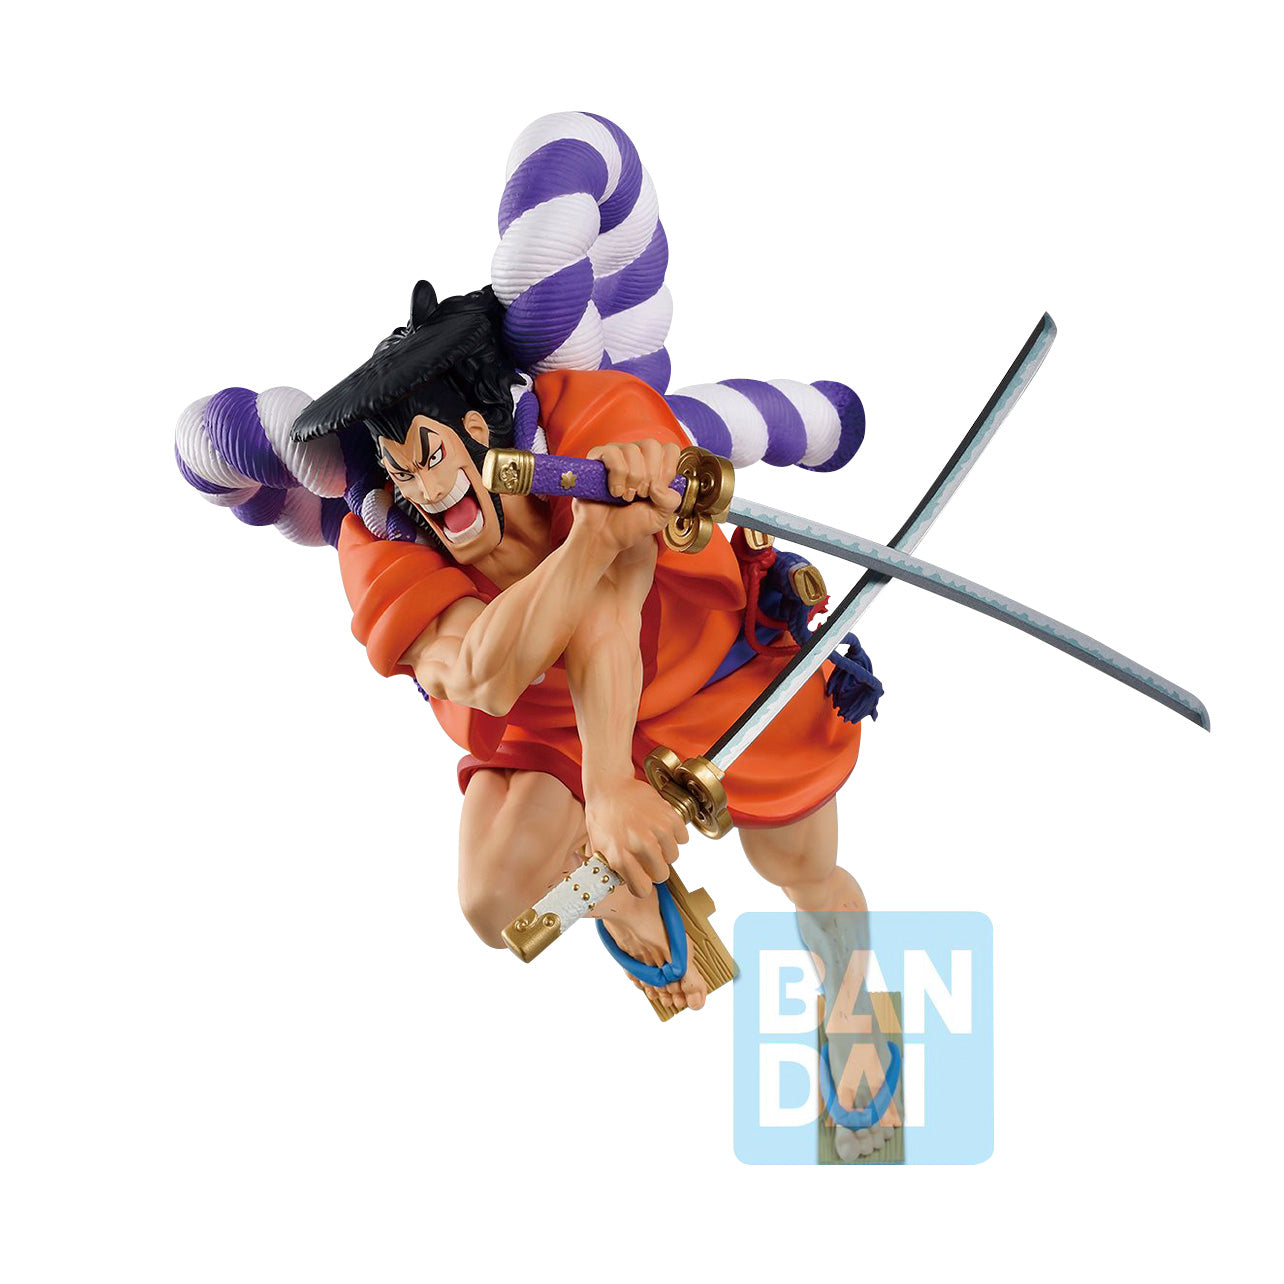 Tome 84 One piece 20 ans collector - Kidkanai | Beebs